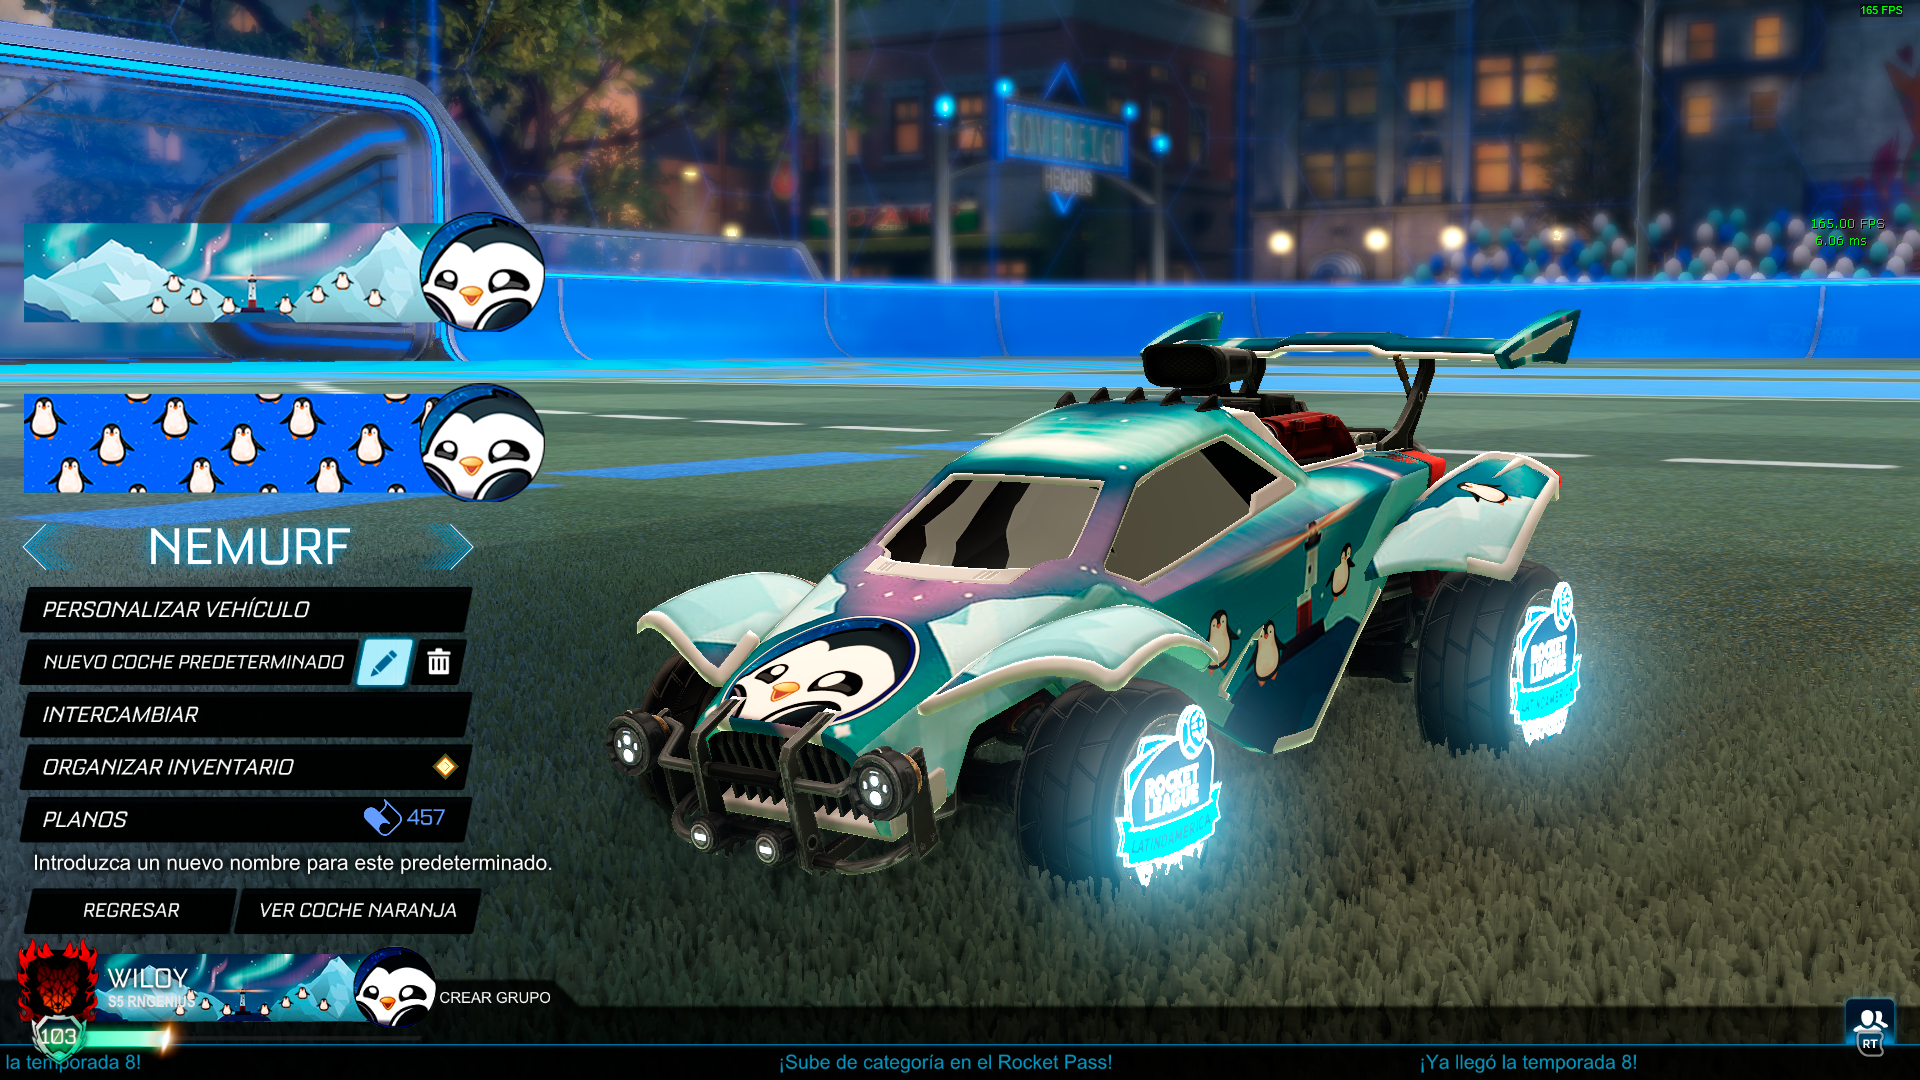 Nemurf’s Decal and 2 Banners